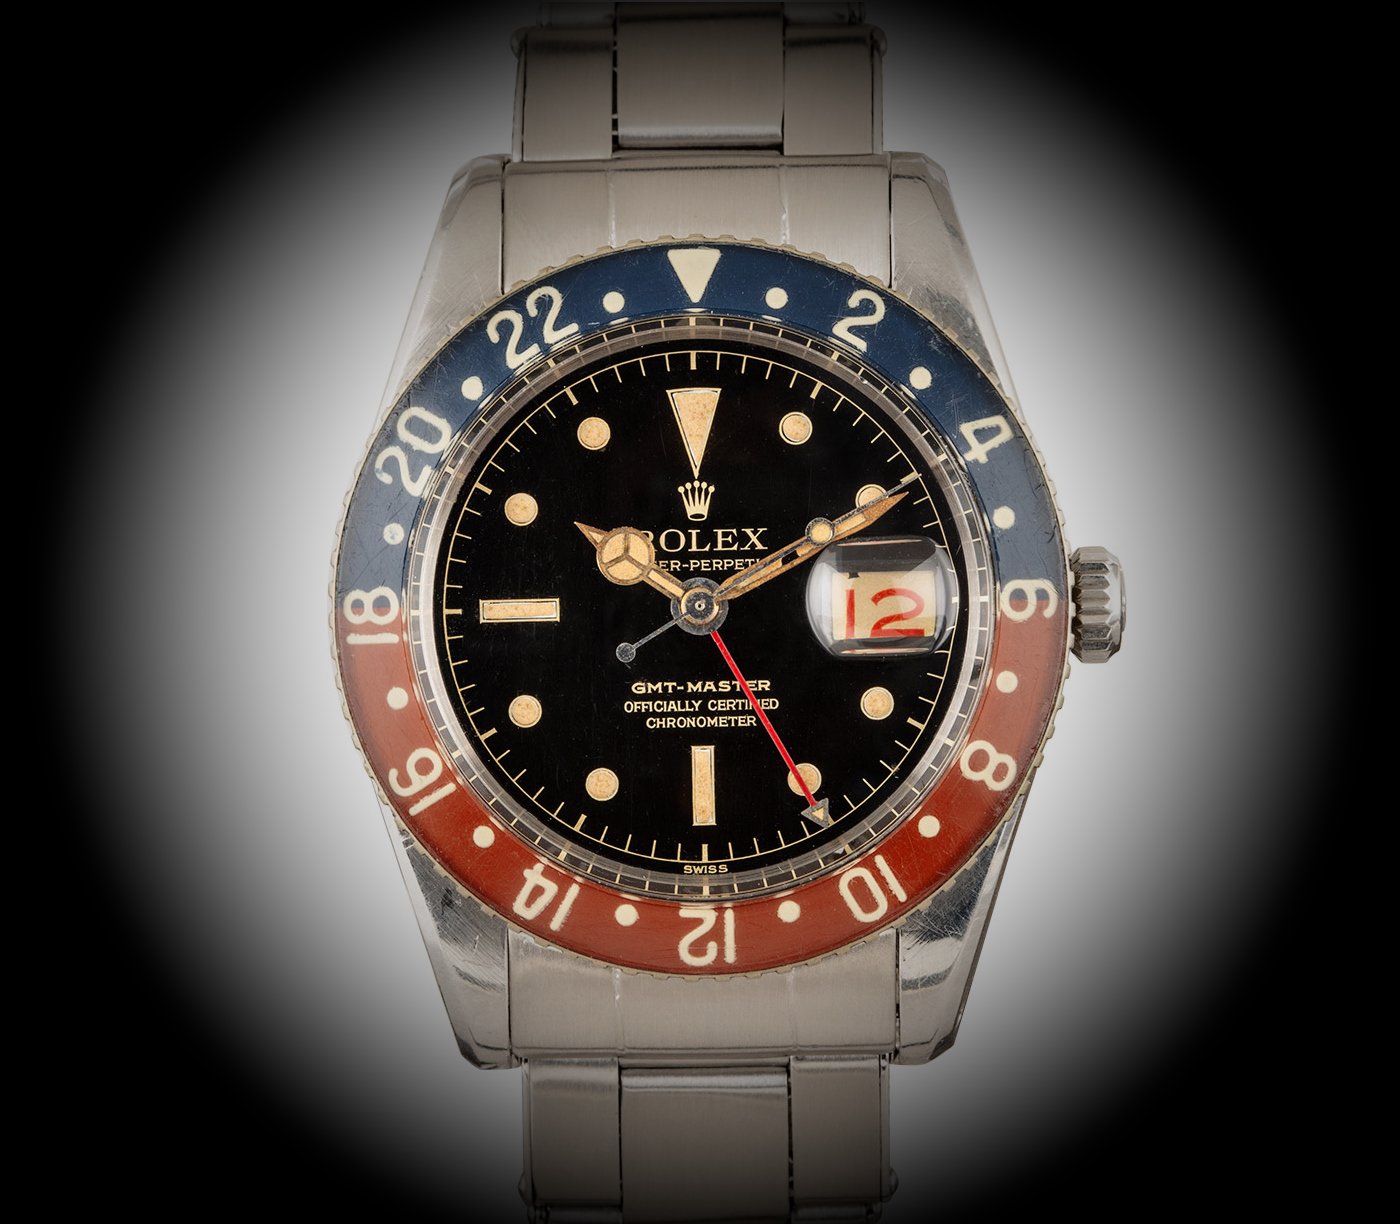 Iconic_watches_of_Hollywood_Rolex_gmt_master_pussy_galore_ref._6542-europa_star_watch_magazine_2020